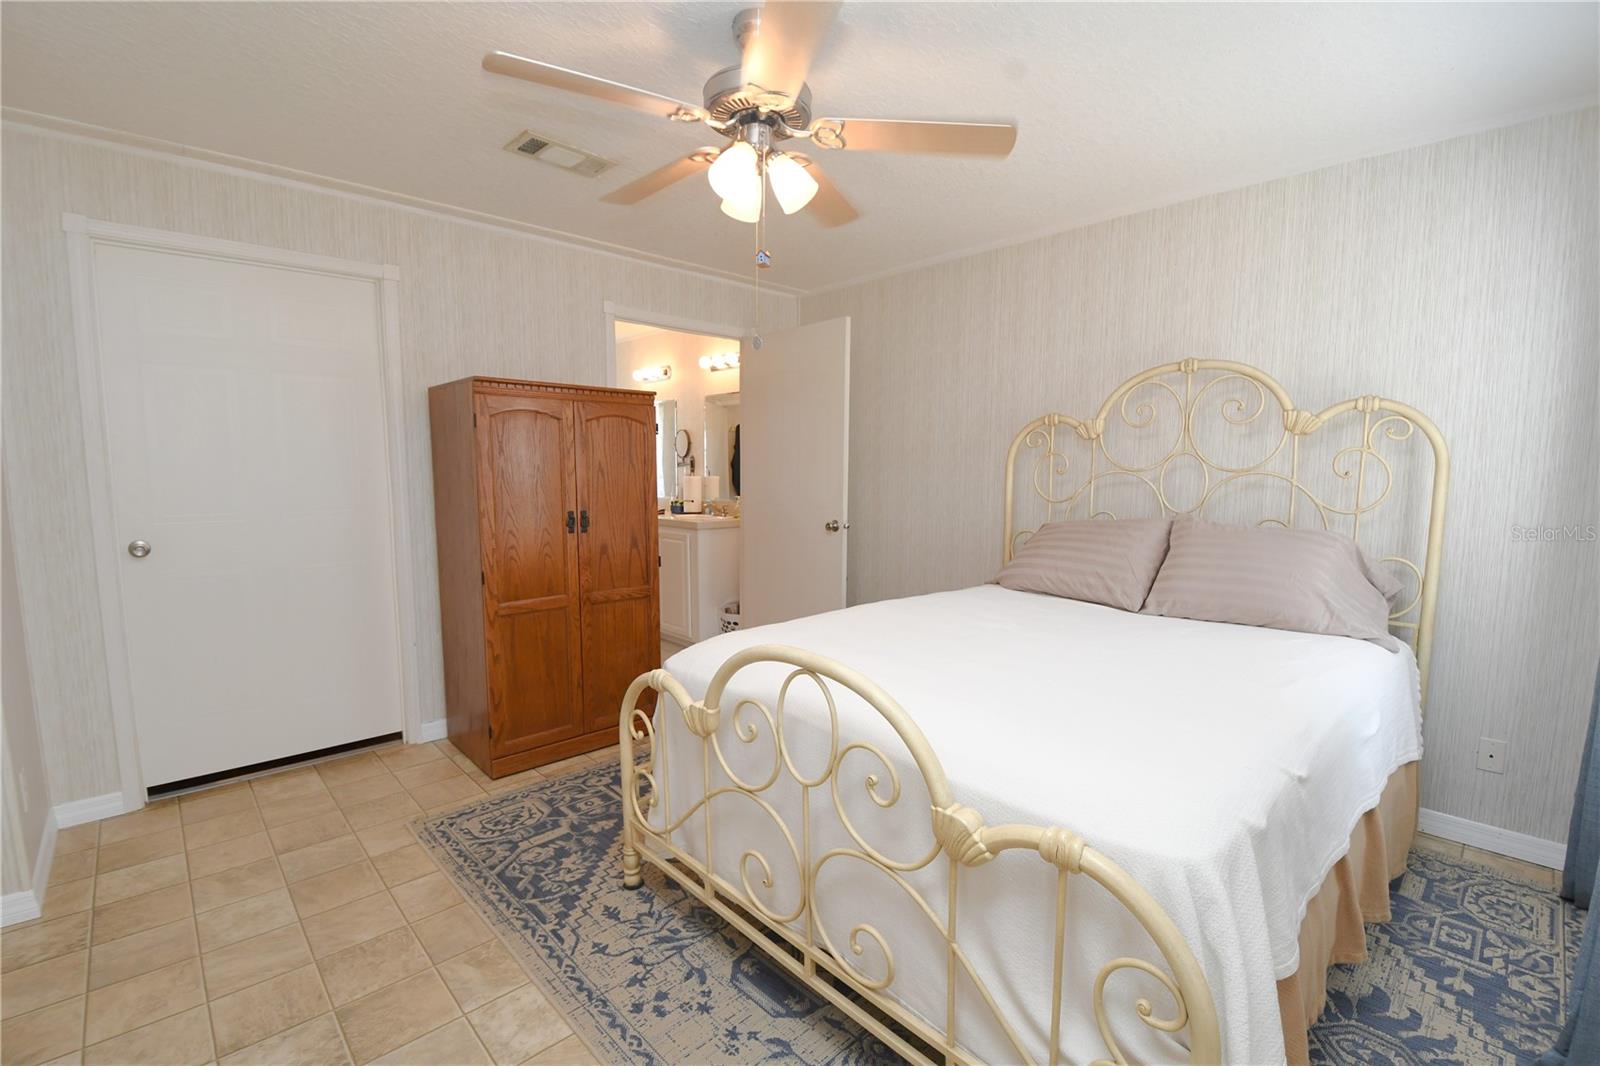 The master bedroom is spacious and has a large walk in closet.